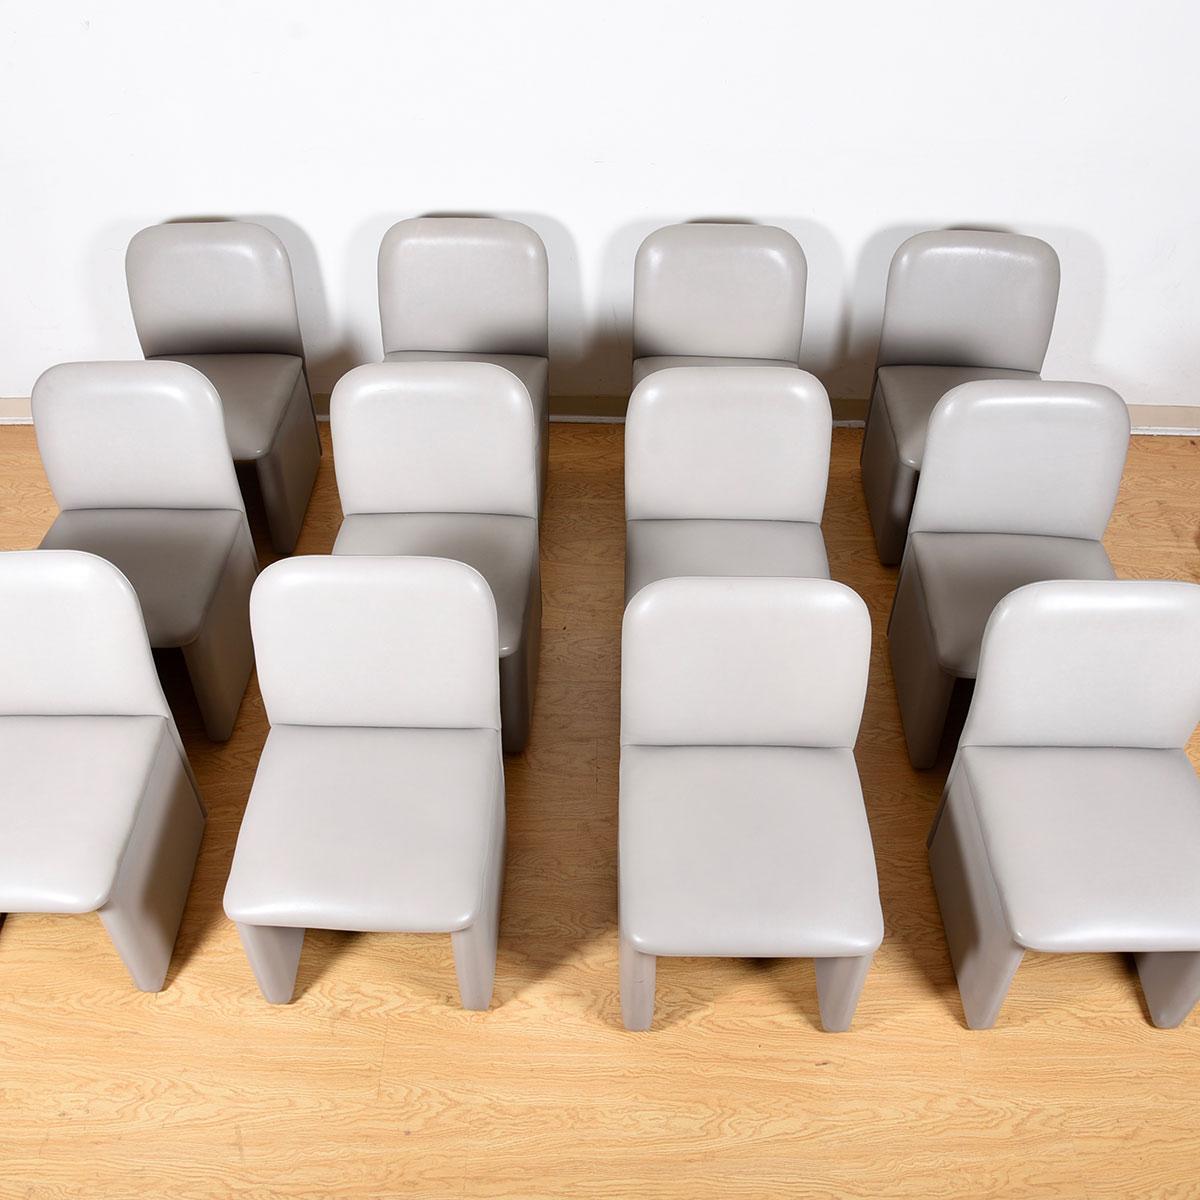 Set of 12 Contemporary Dining / Conference Chairs Fully Upholstered in Pearl Gray Leather

Additional information:
Material: Upholstery, Leather
Purchased from a leading advertising agency as used in one of their conference rooms
Fully